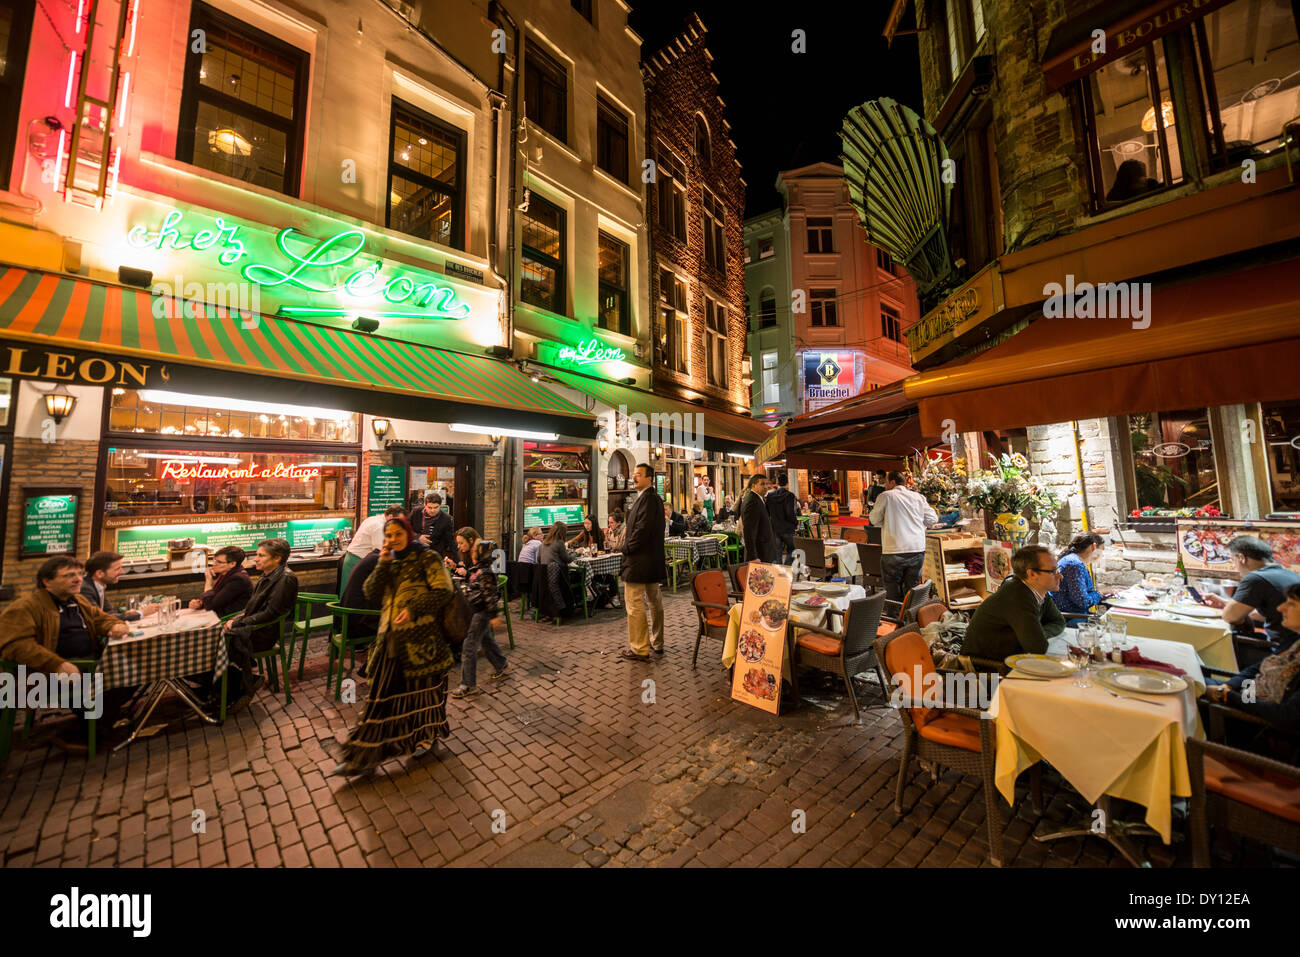 A popular Brussels restaurant specializing in Belgian mussels, Chez Leon on Rue des Bouchers, sits on a narrow cobblestone street along with a street filled with other restaurants popular with tourists. Stock Photo